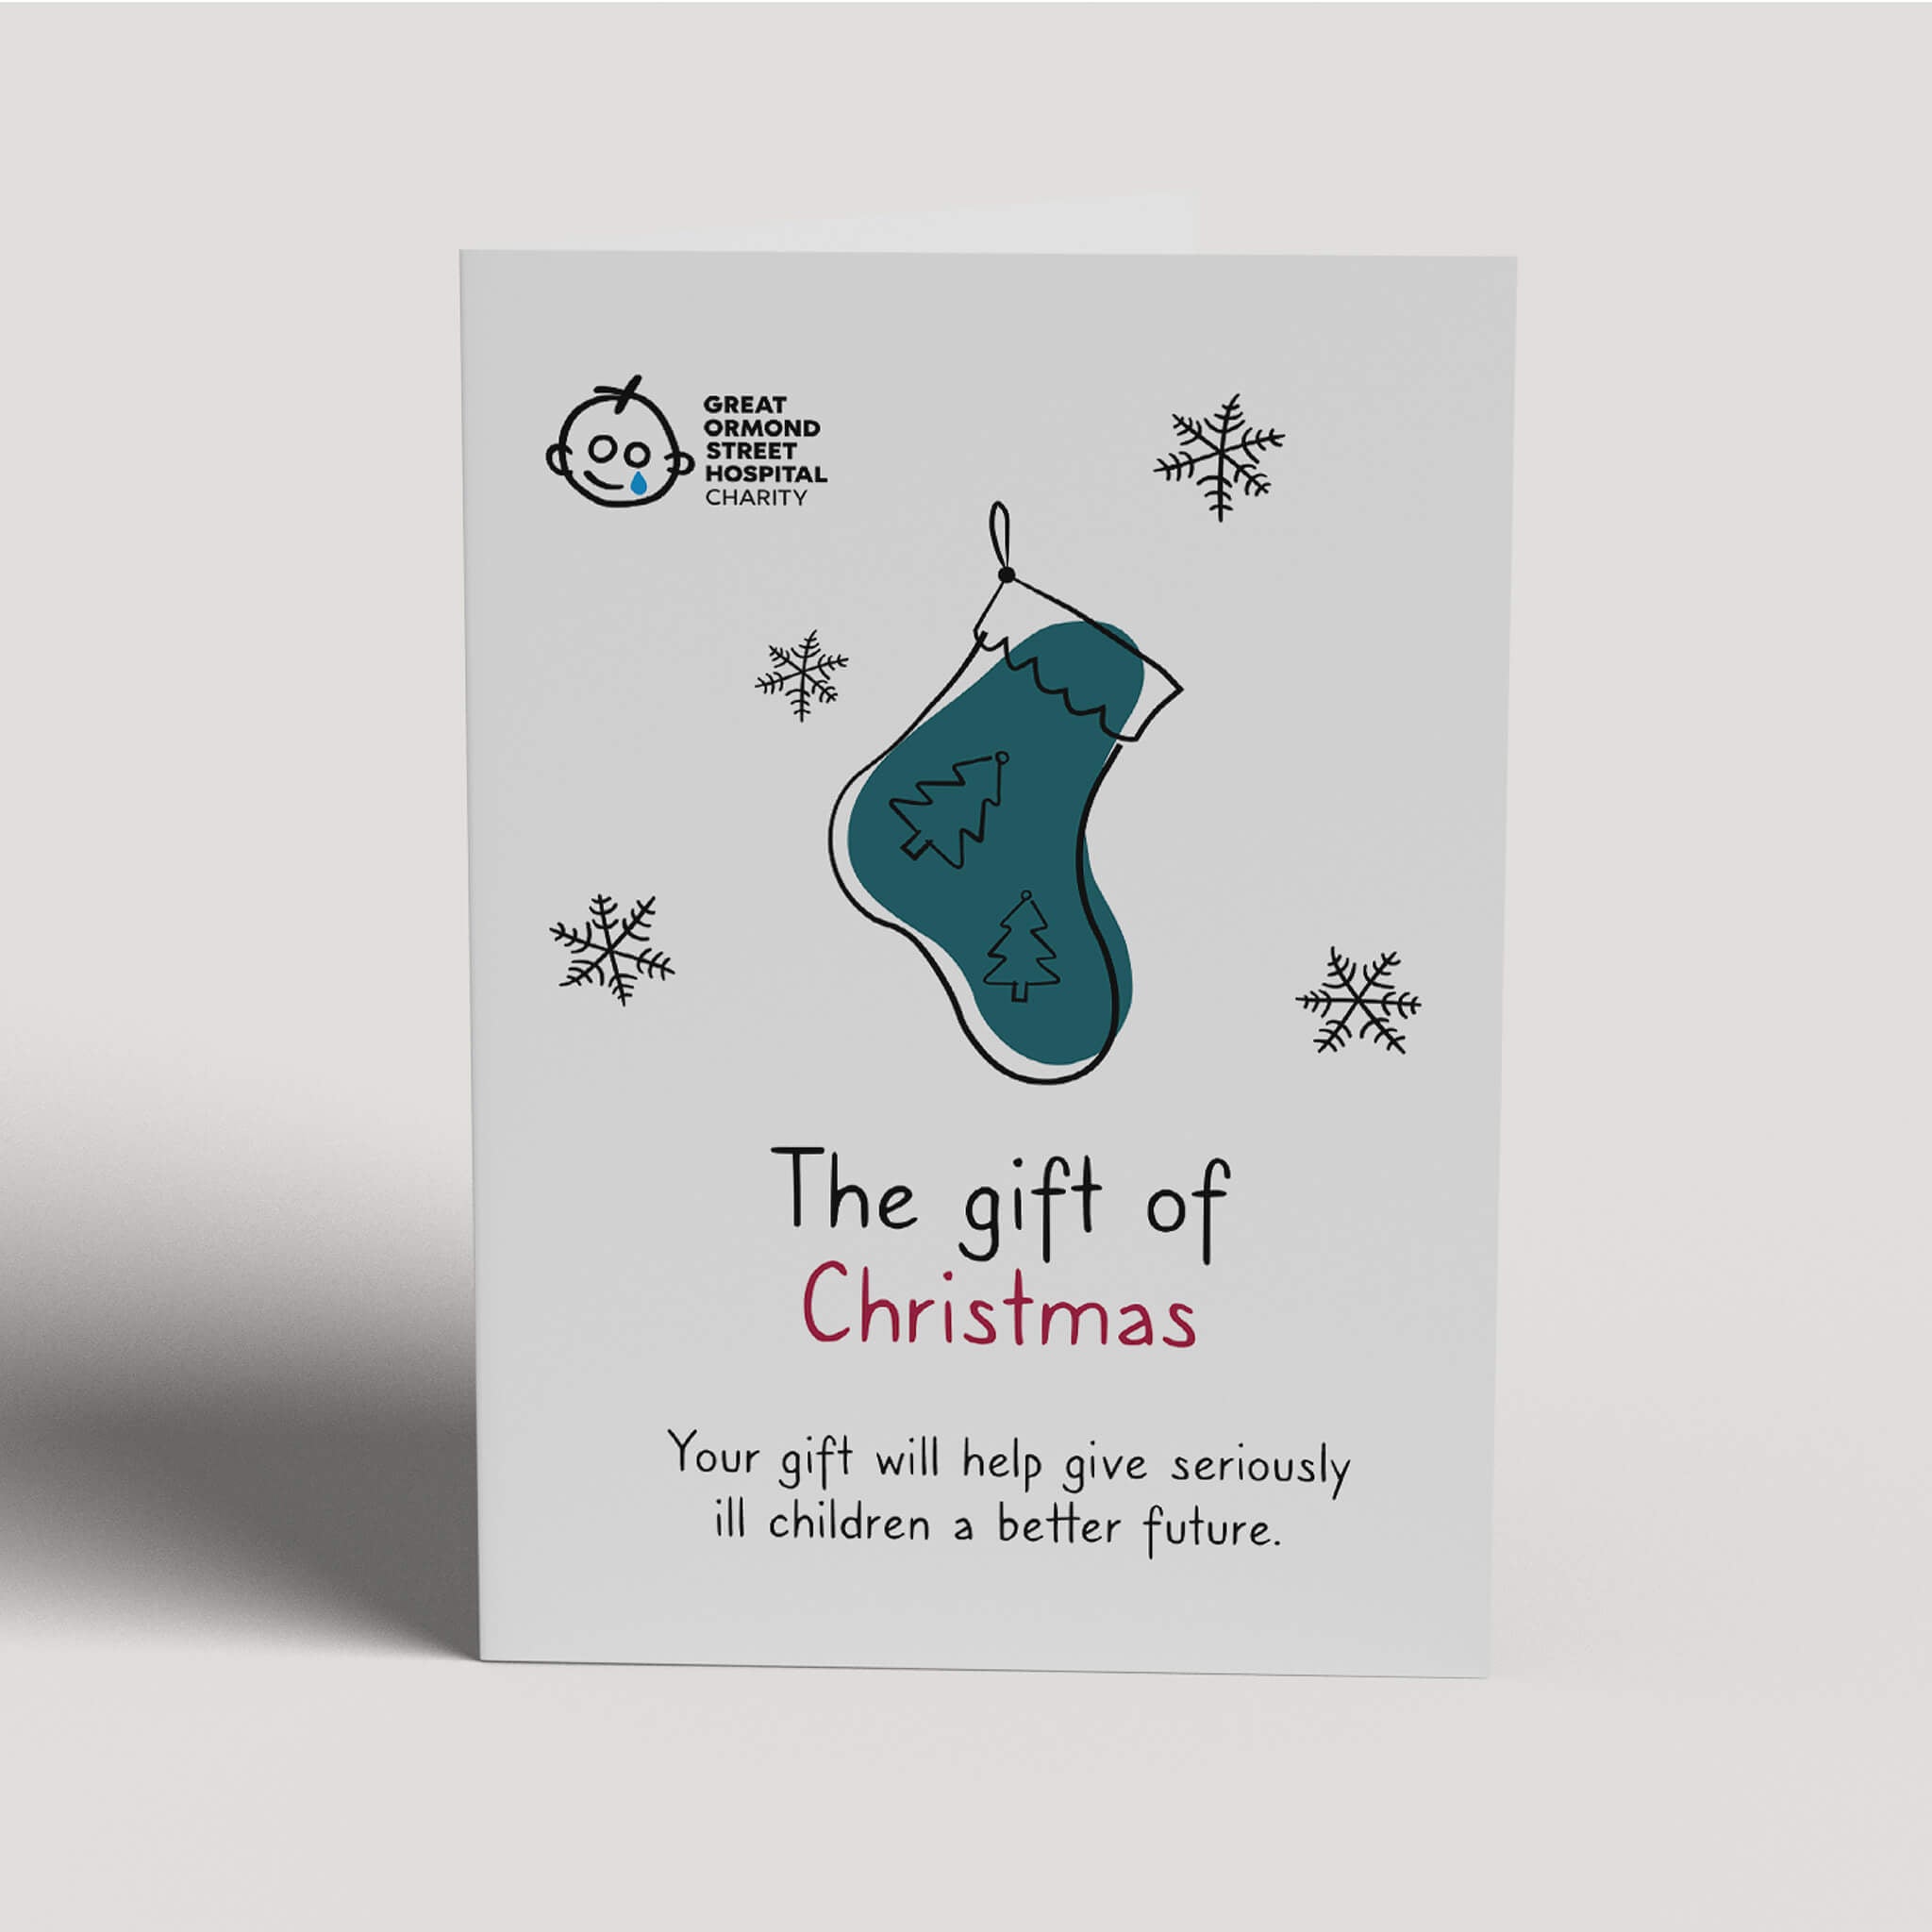 GOSH_Charity_alternative_gift_card_for_christmas_donations